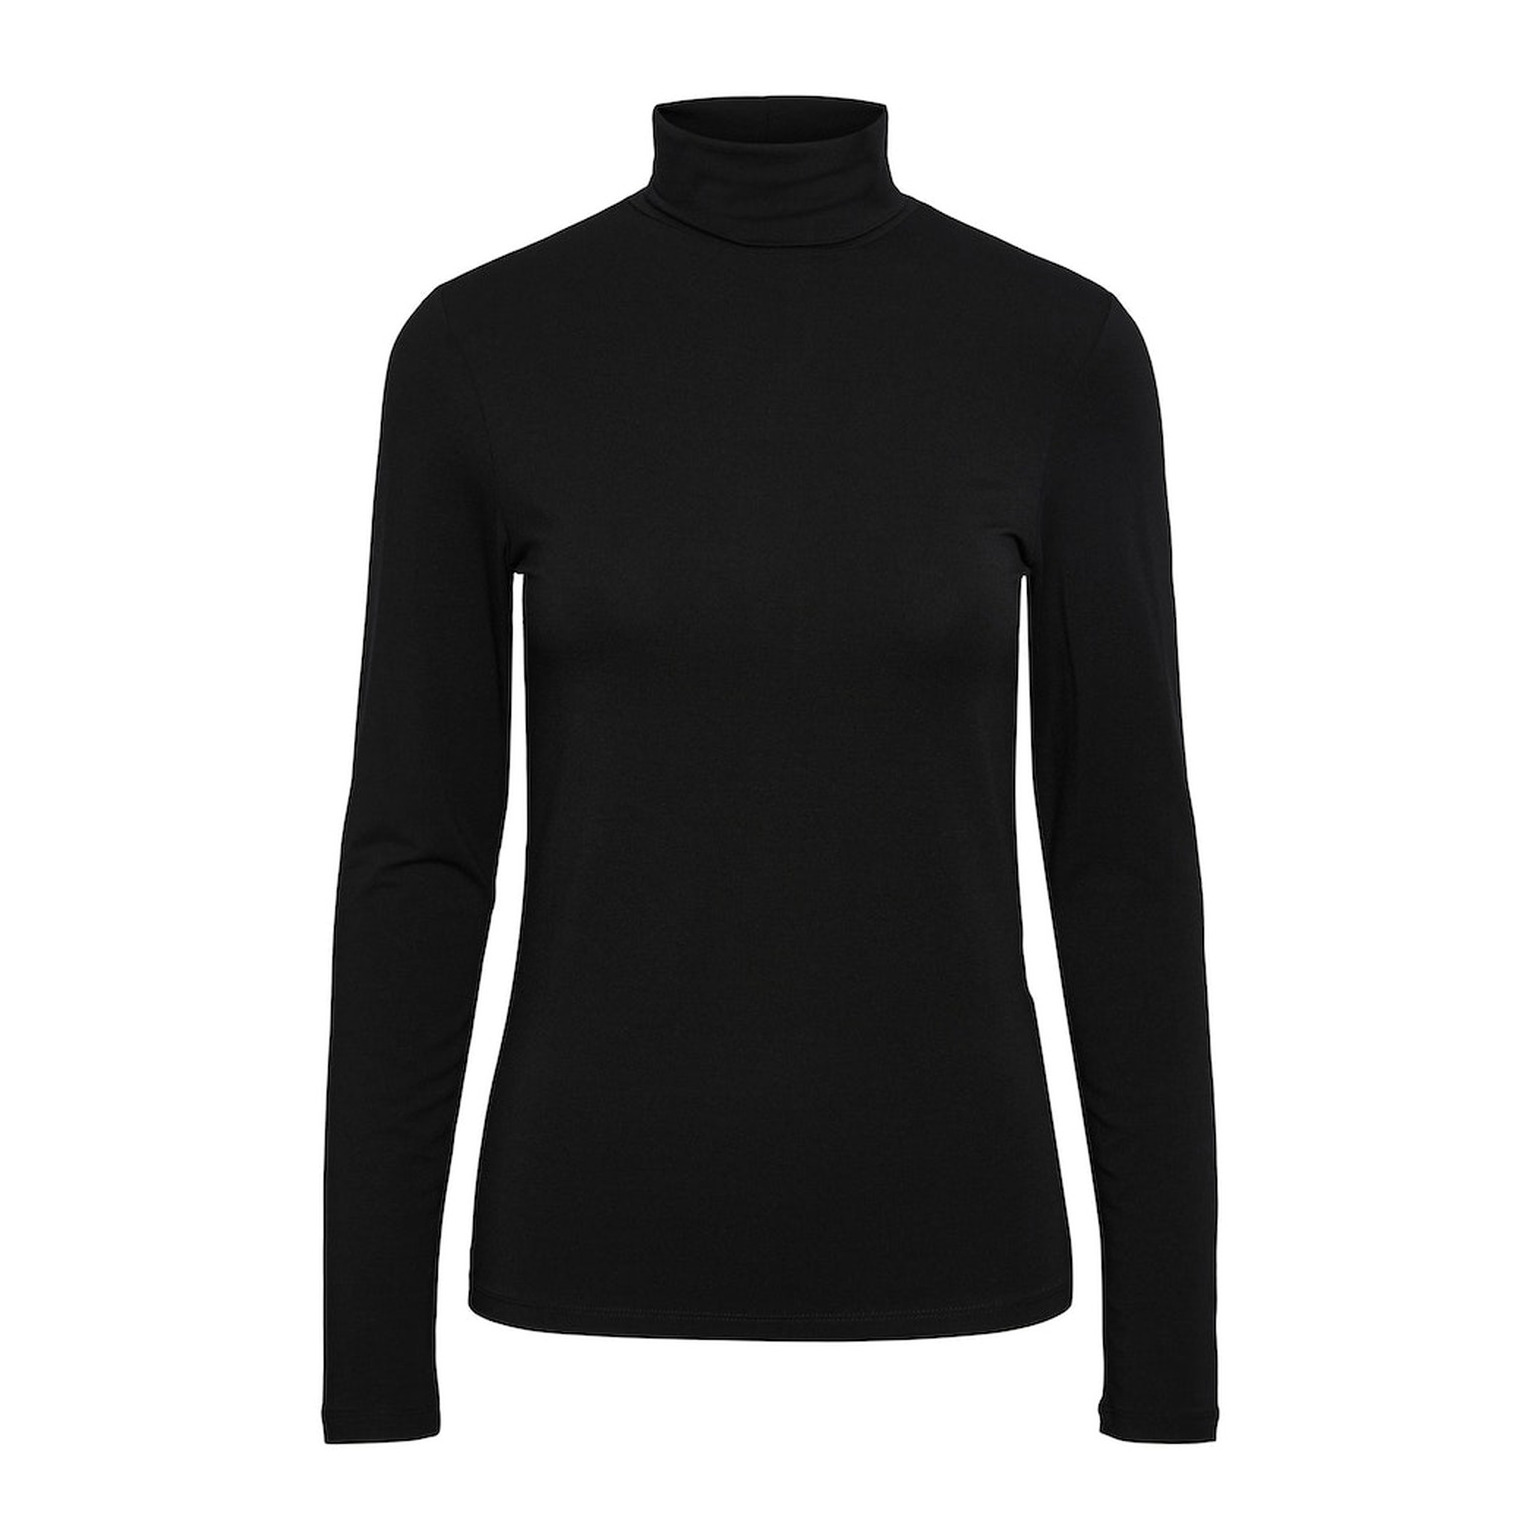 & PCSIRENE ROLLNECK Tops TOP Shirts | Schuh Mücke LS NOOS PIECES